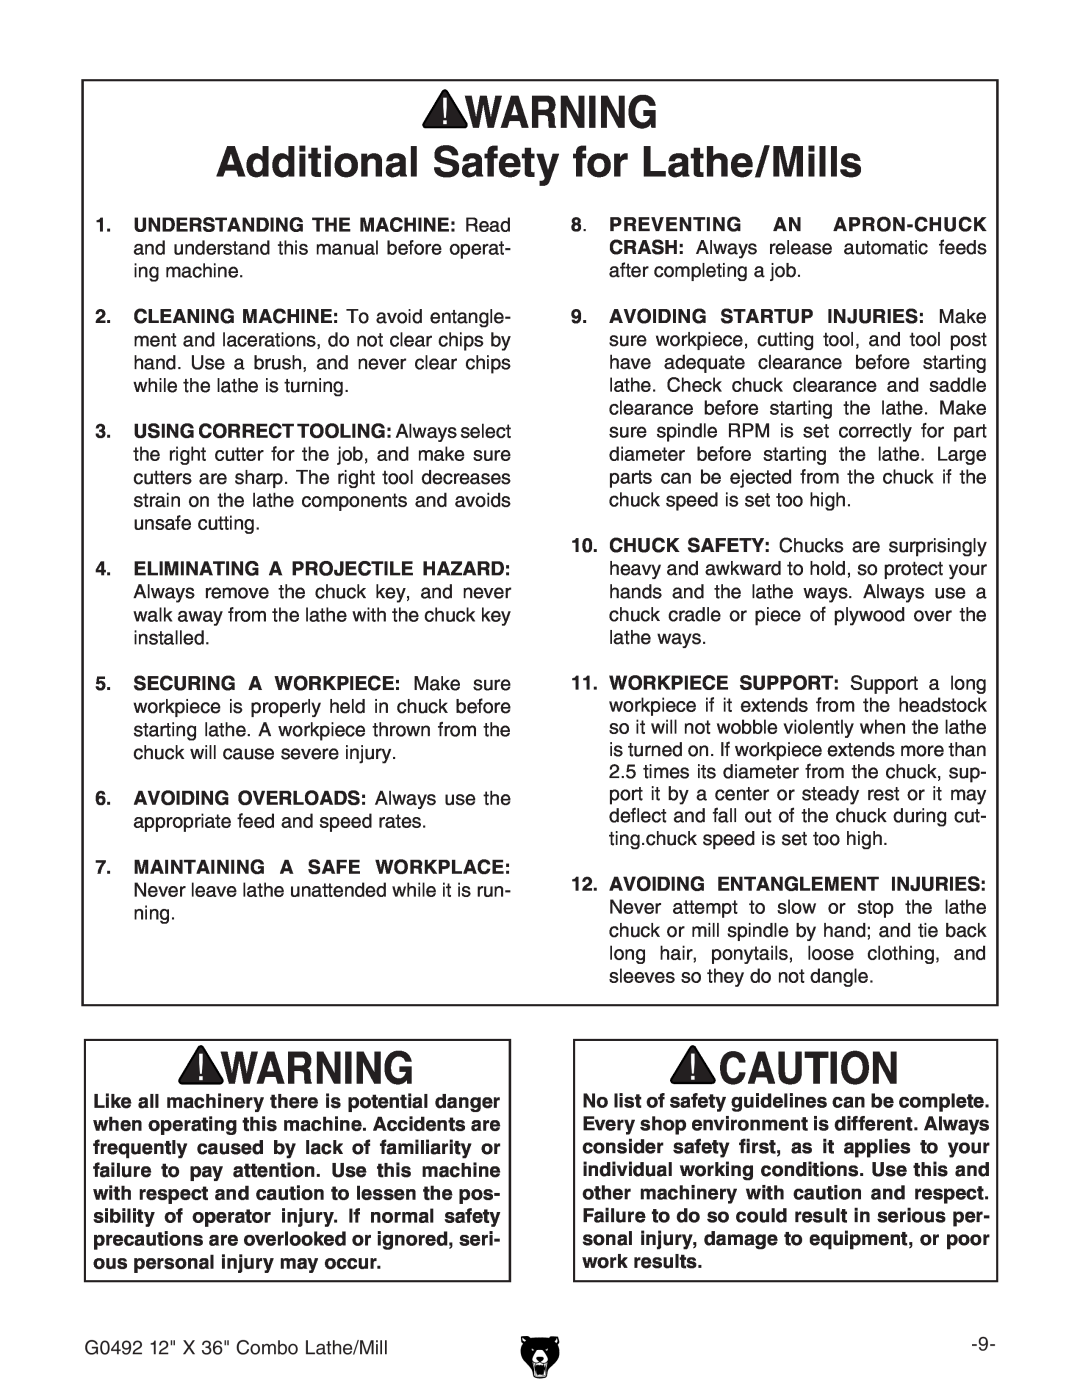 Grizzly G0492 manual Additional Safety for Lathe/Mills, Eliminating A Projectile Hazard, &M+8dbWdAViZ$Baa 